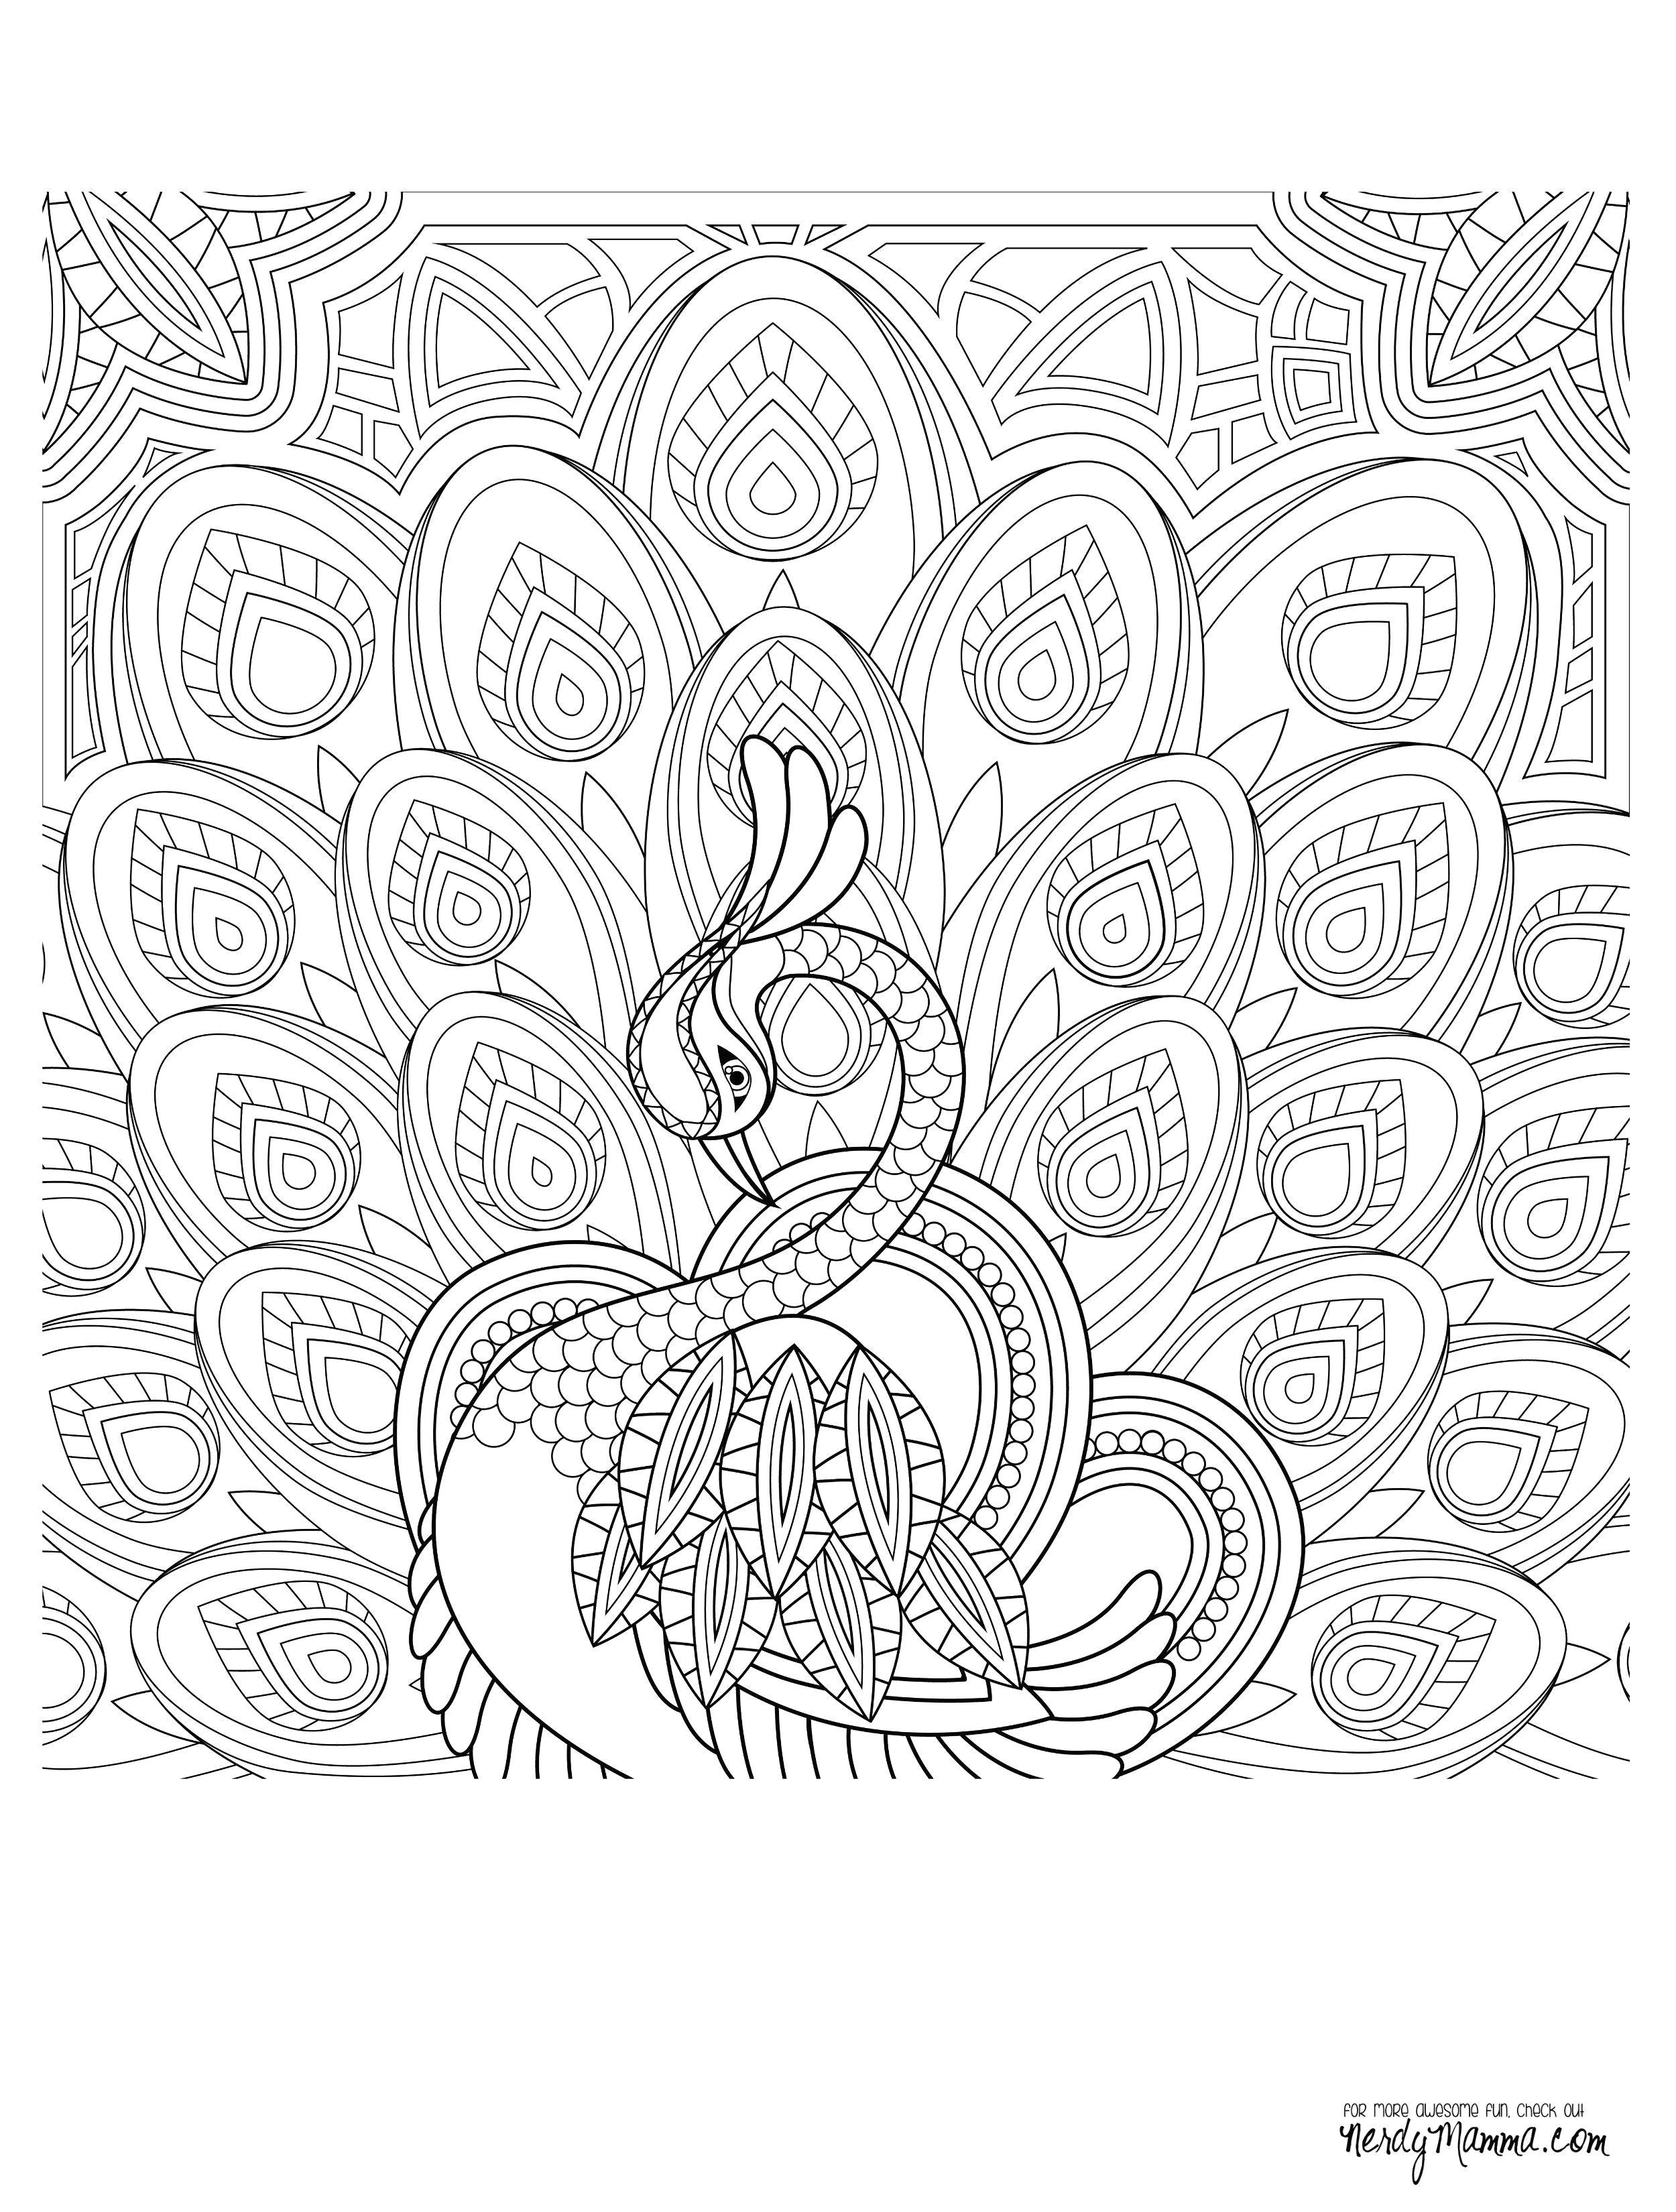 easy flower mandala coloring pages elegant free printable coloring pages for adults best awesome coloring